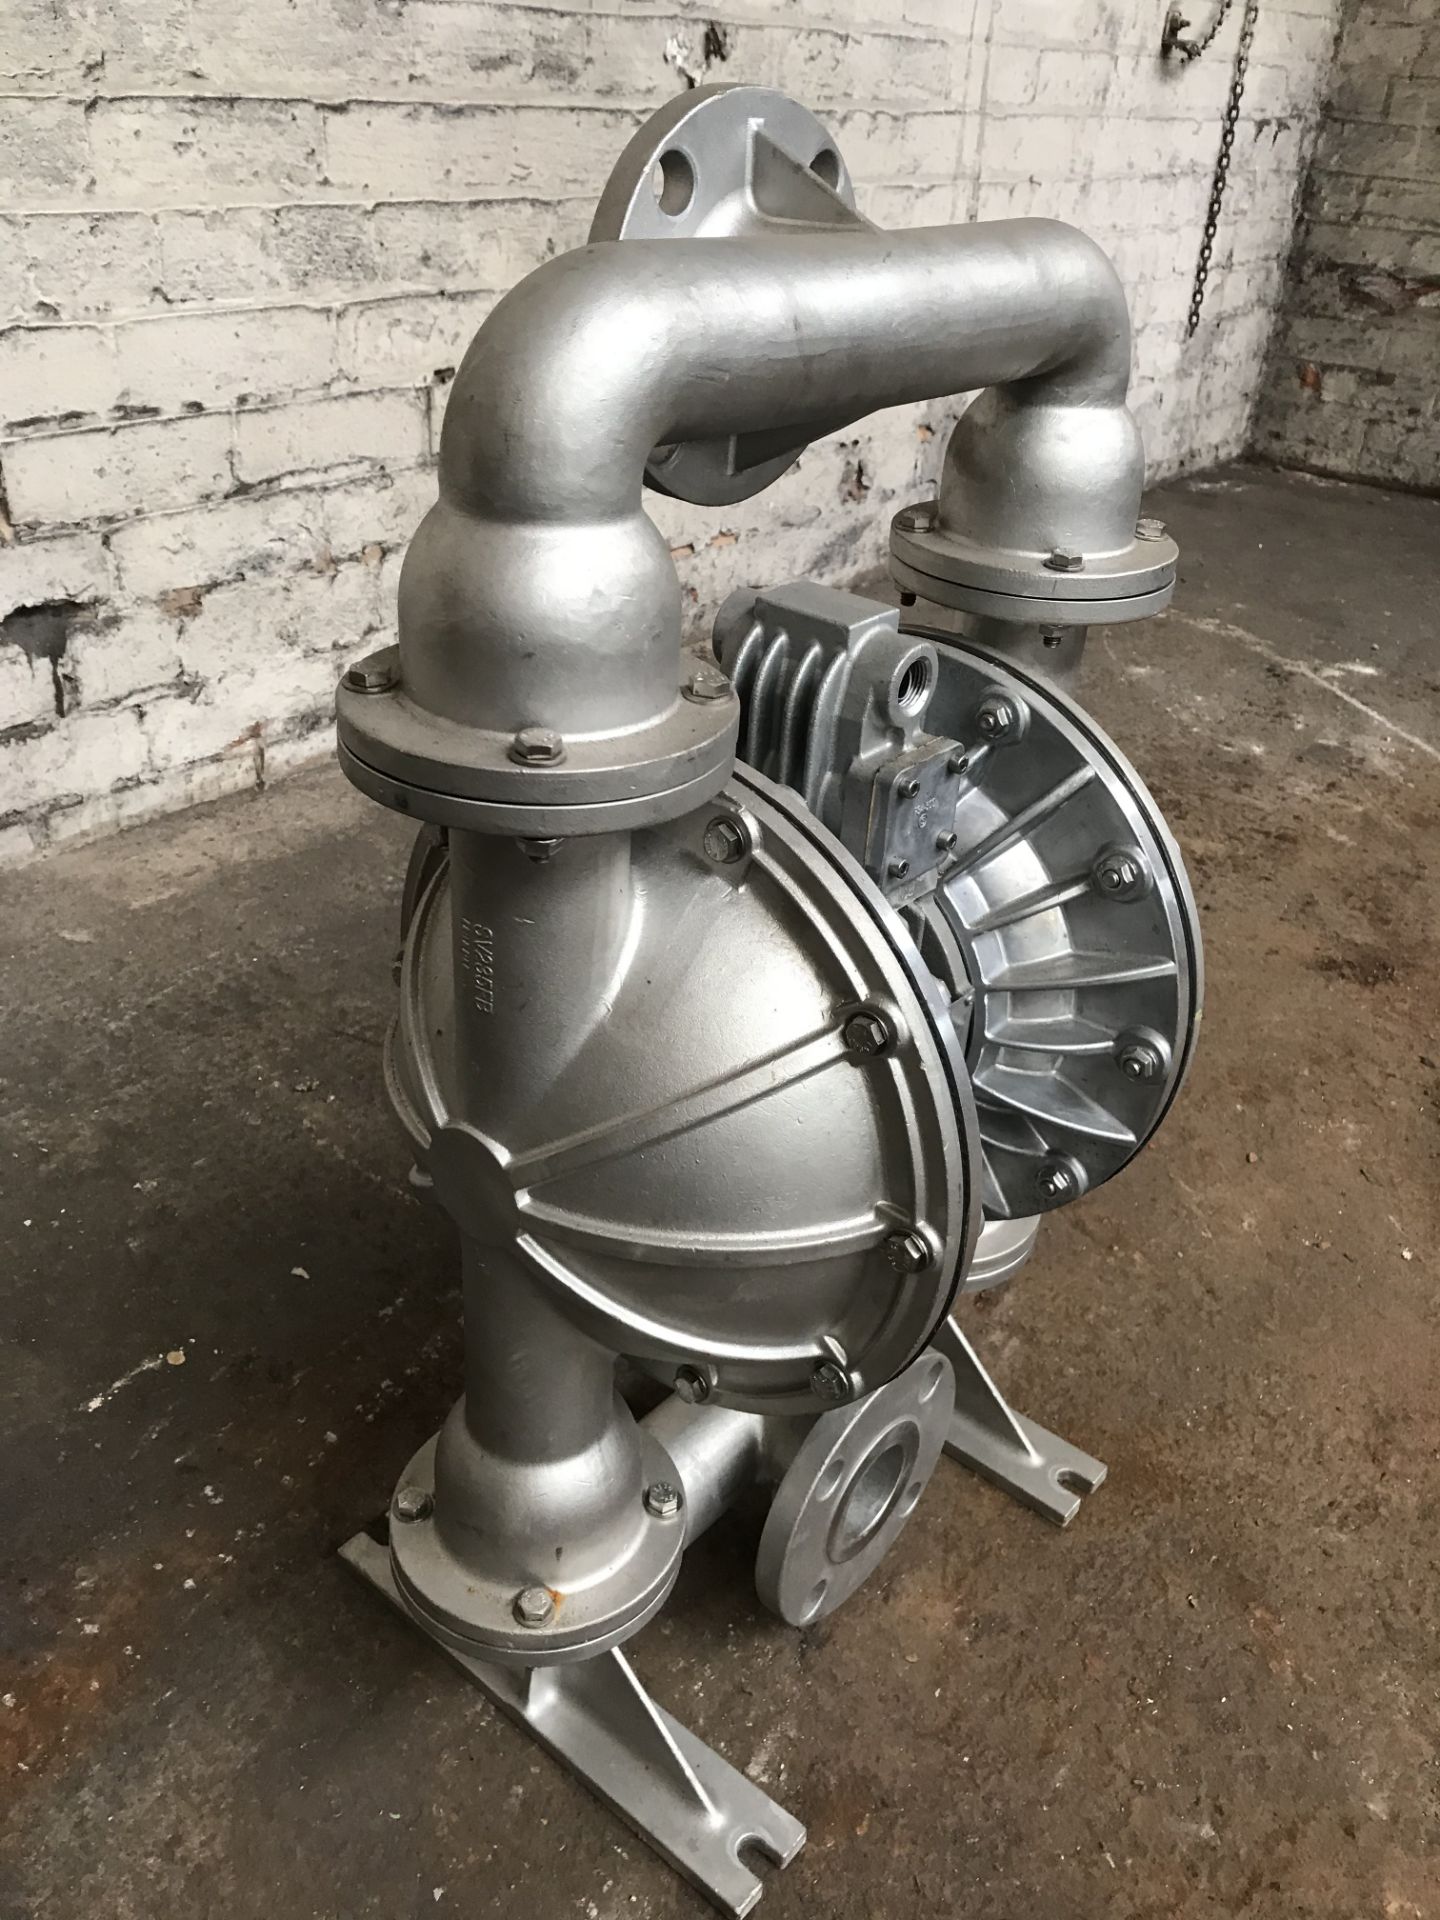 Versa-Matic 2"" Air Operated Stainless Steel Diaphragm Pump | YOM: 2019 | Ref: A343 - Image 2 of 4